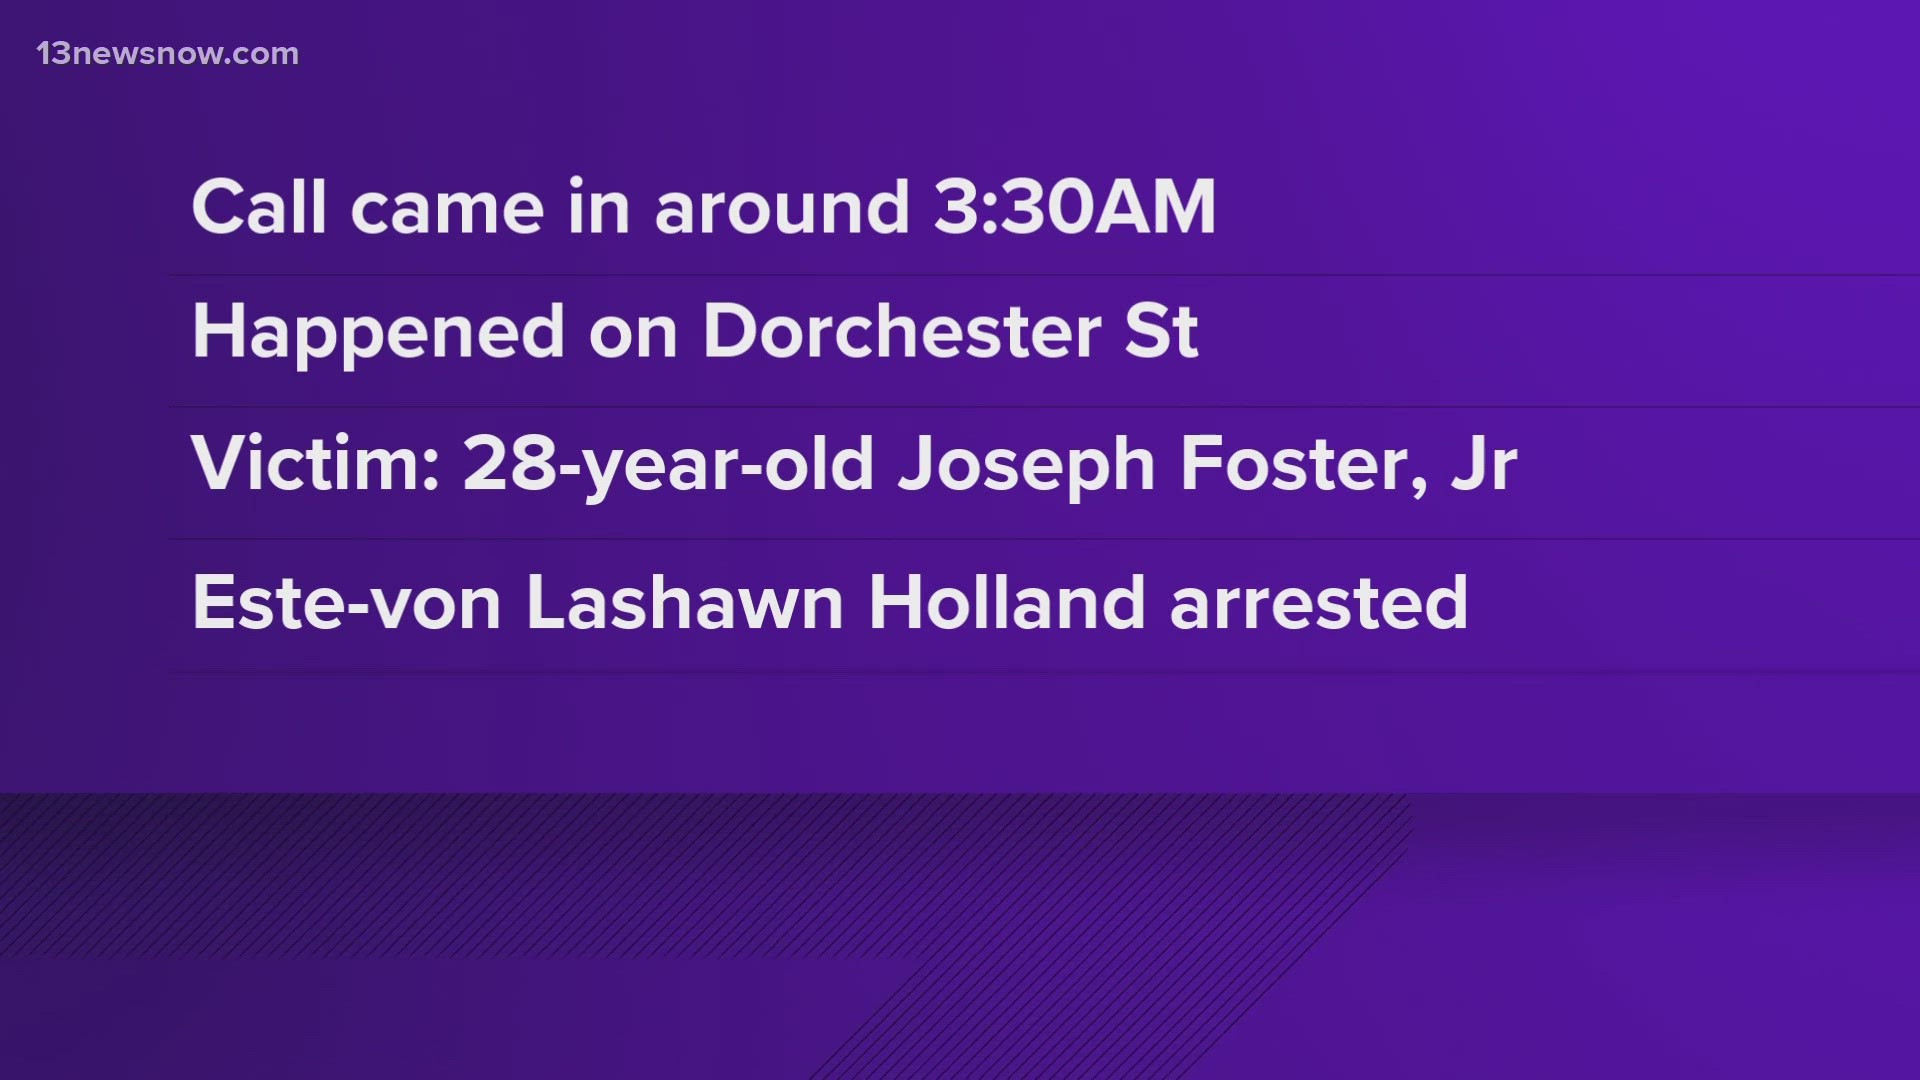 According to police, Este-von Holland was arrested and charged after officers found Joseph Foster Jr., who died after getting shot.